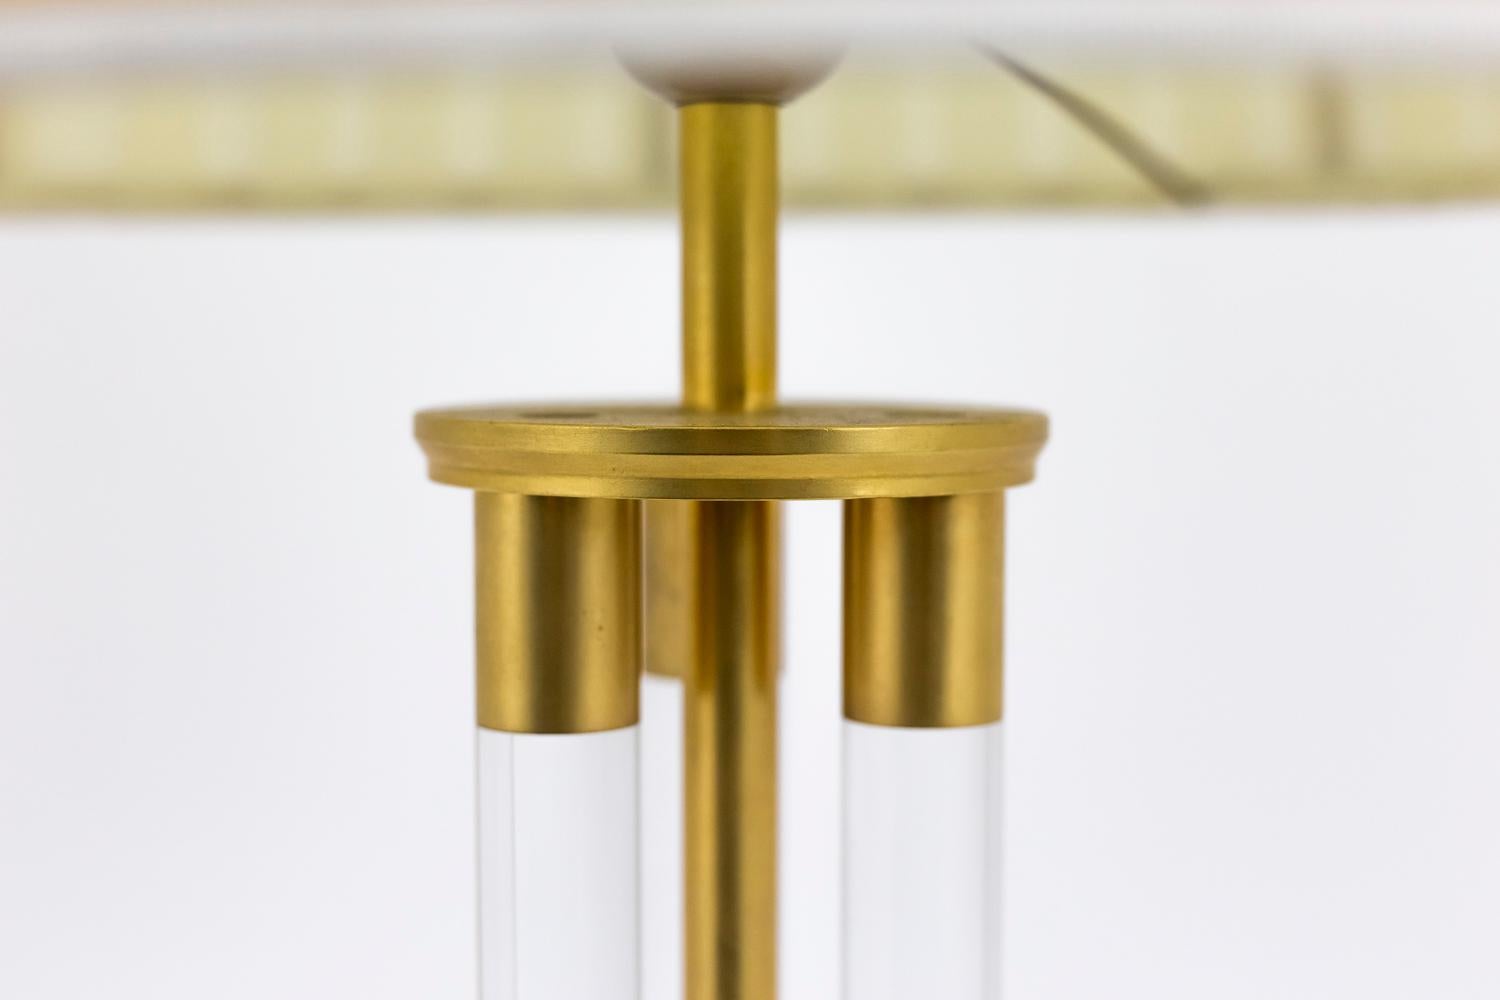 Lamp in Lucite and gilt bronze. Shaft composed of three Lucite tubes holding on the top and bottom by gilt bronze rings and a central gilt bronze stick. Circular base with steps decor.

Work realized in the 1940s.

New and functional electrical